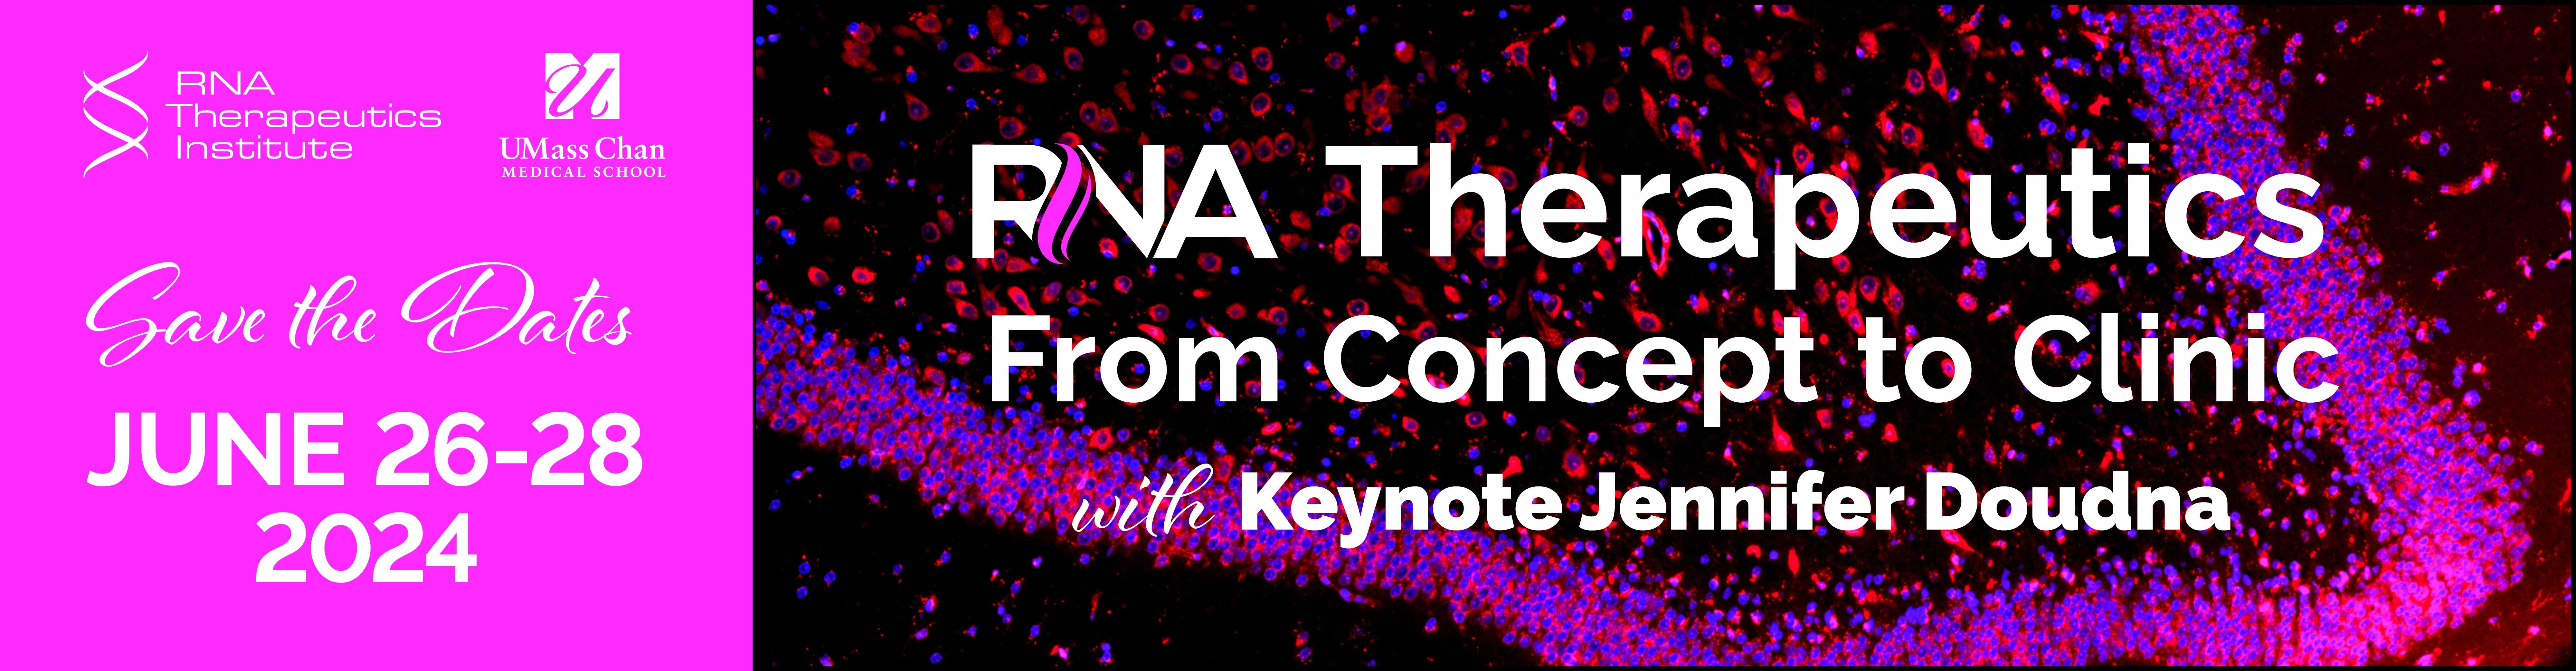 2024 RNA Therapeutics: From Concept to Clinic Symposium